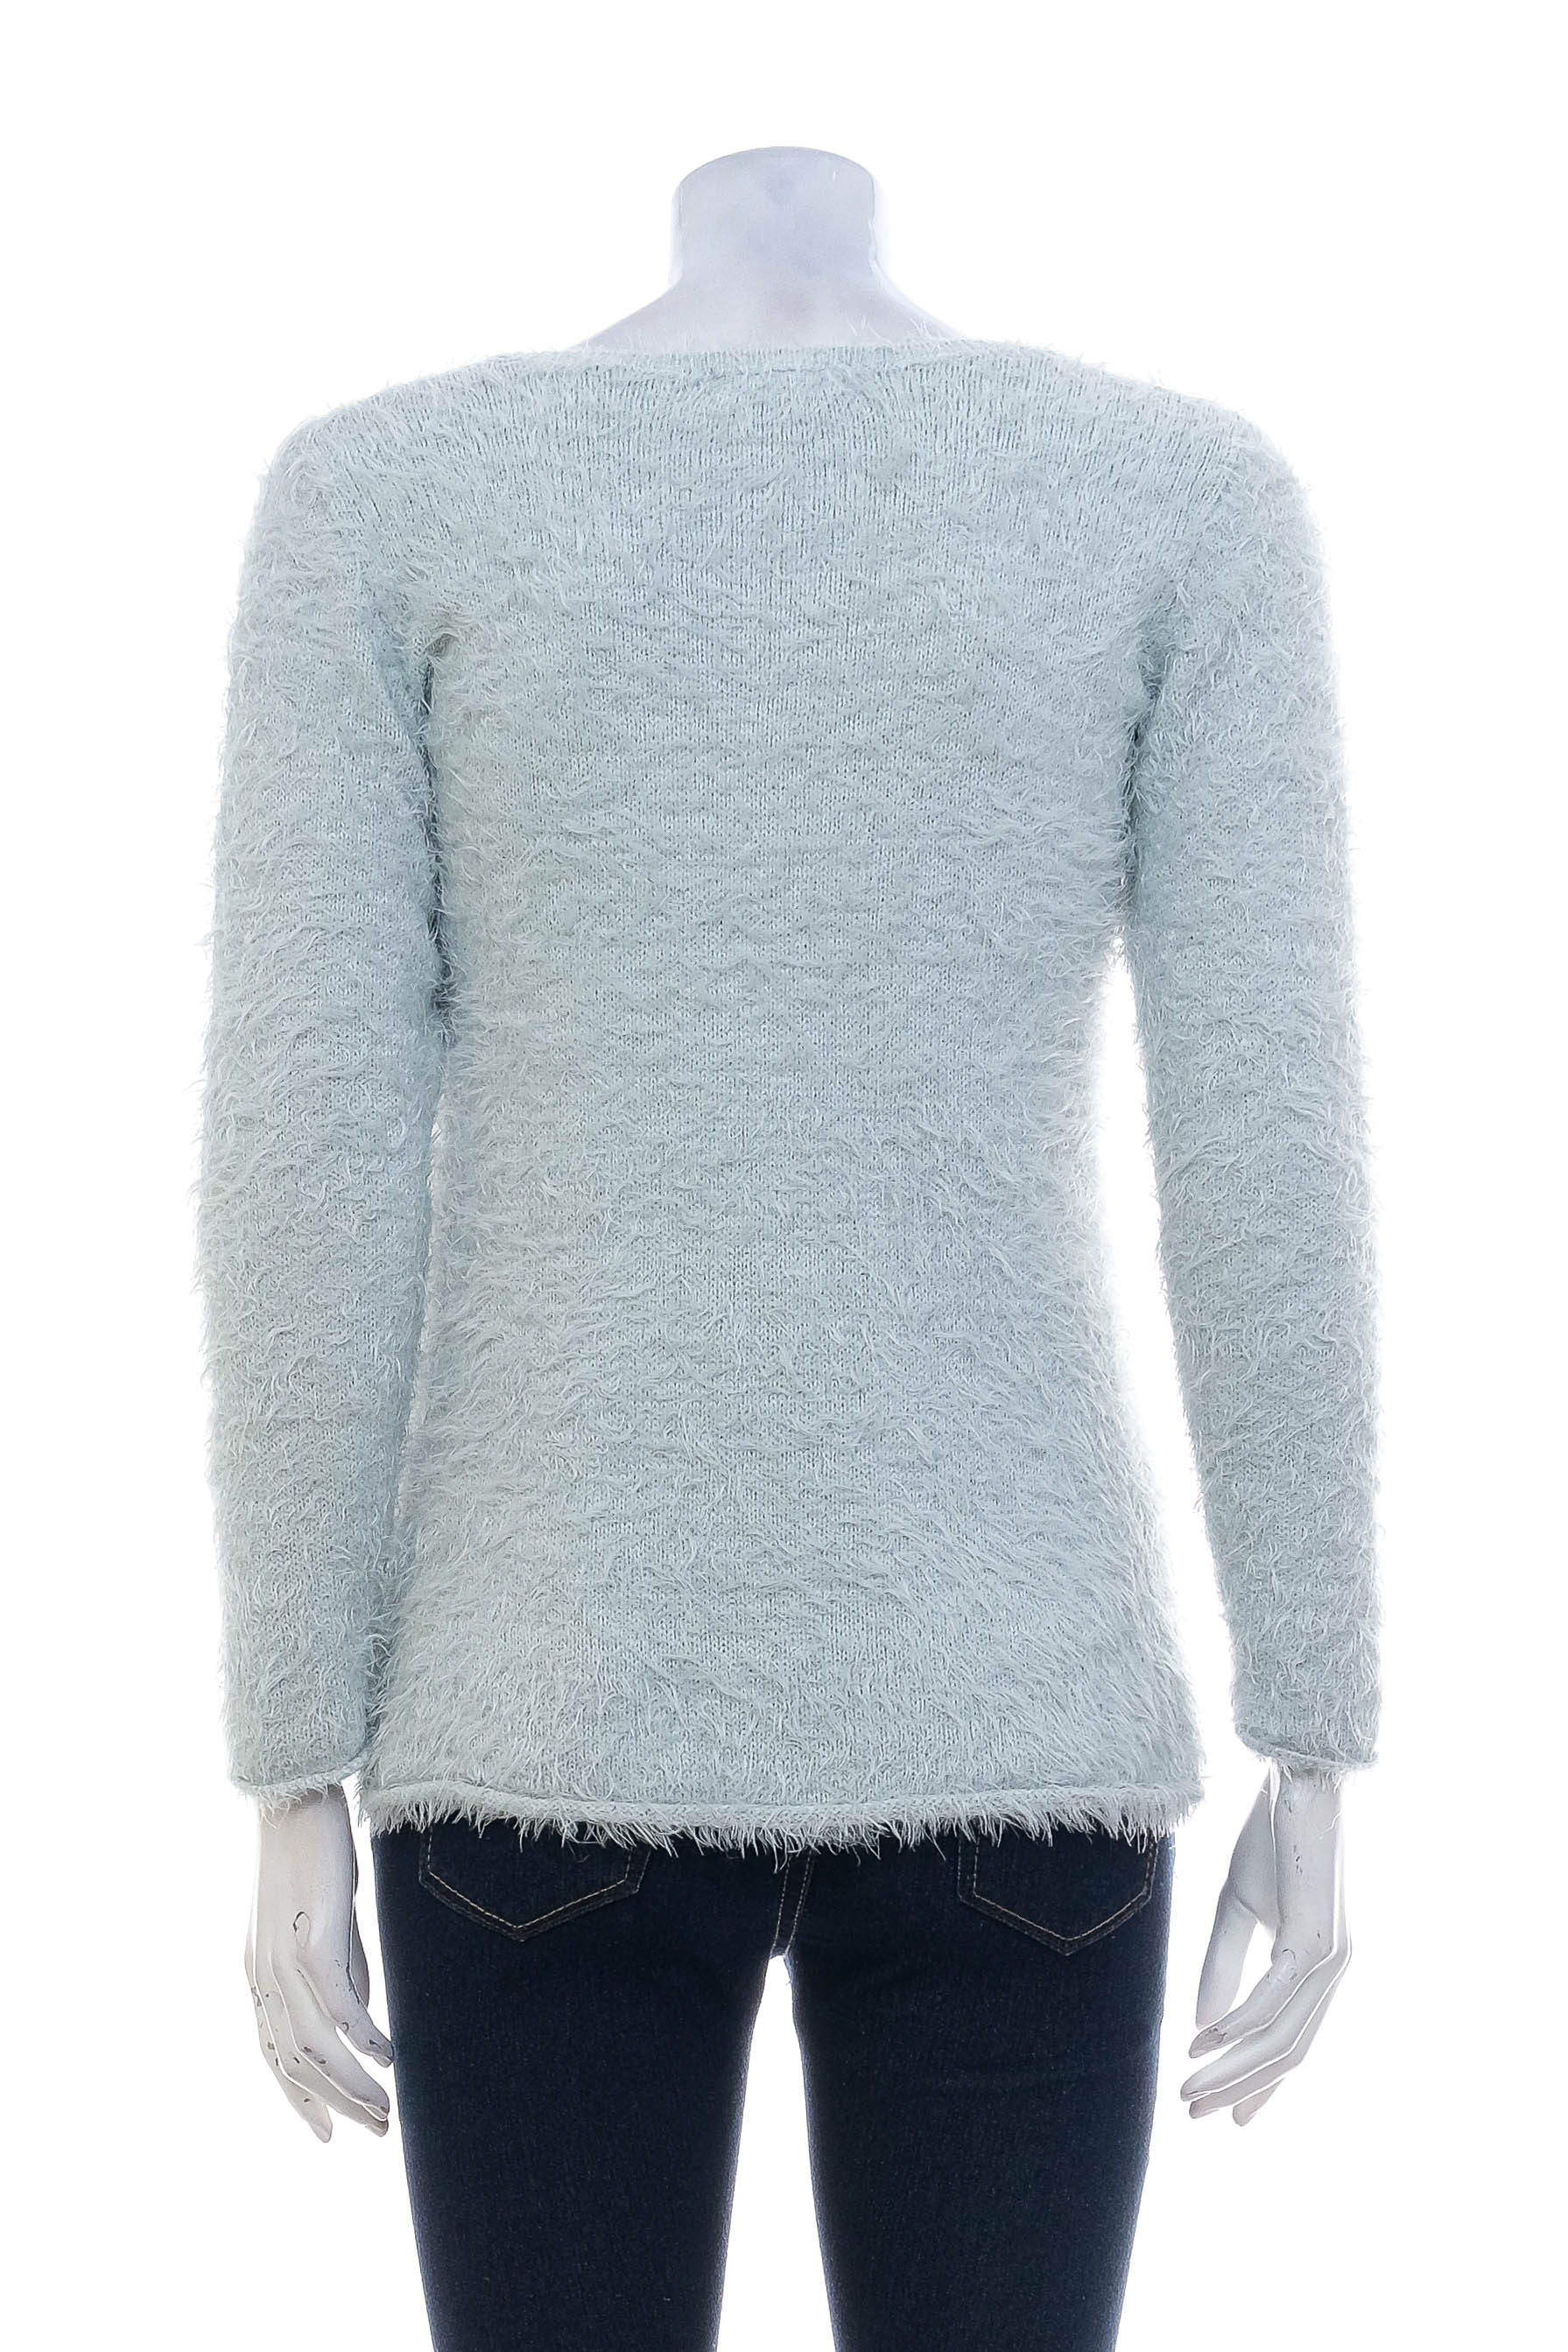 Sweaters for Girl - H&M - 1